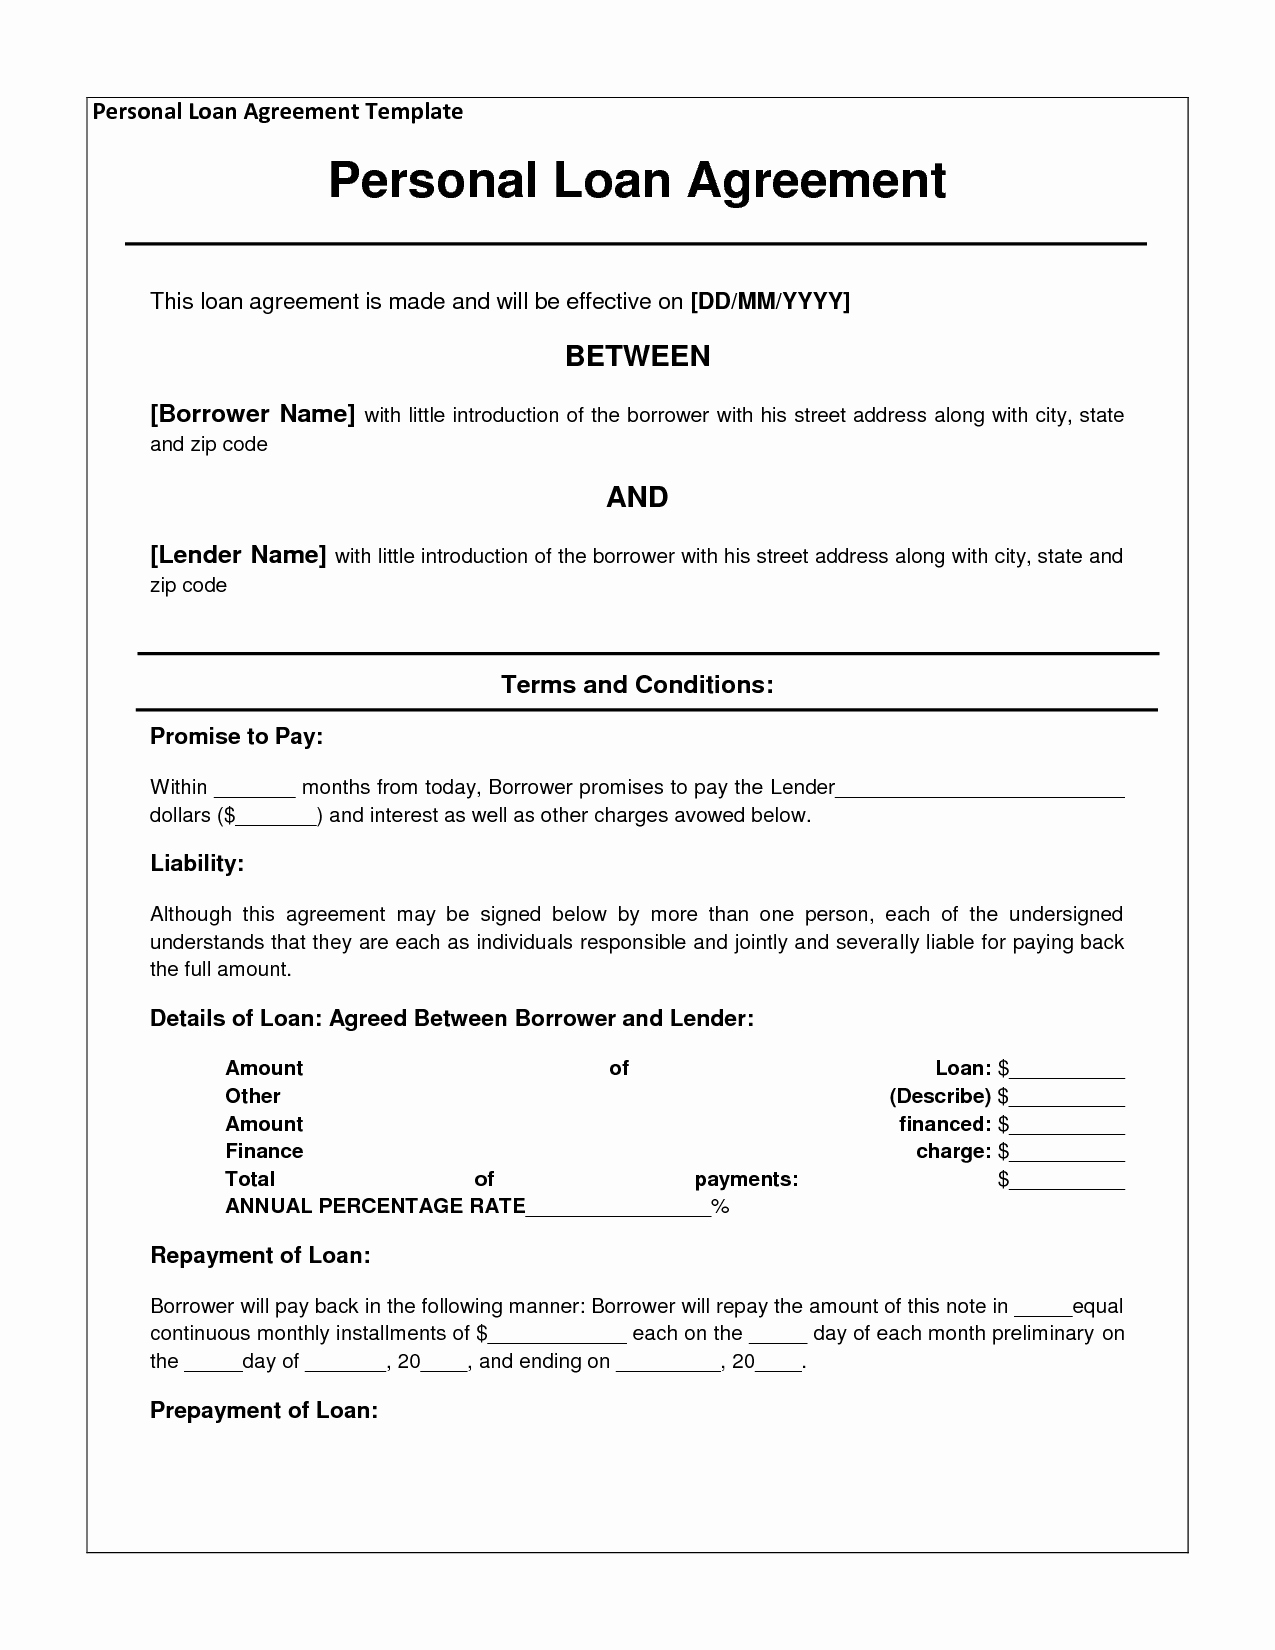 Personal Loan Documents Template Beautiful 14 Loan Agreement Templates Excel Pdf formats